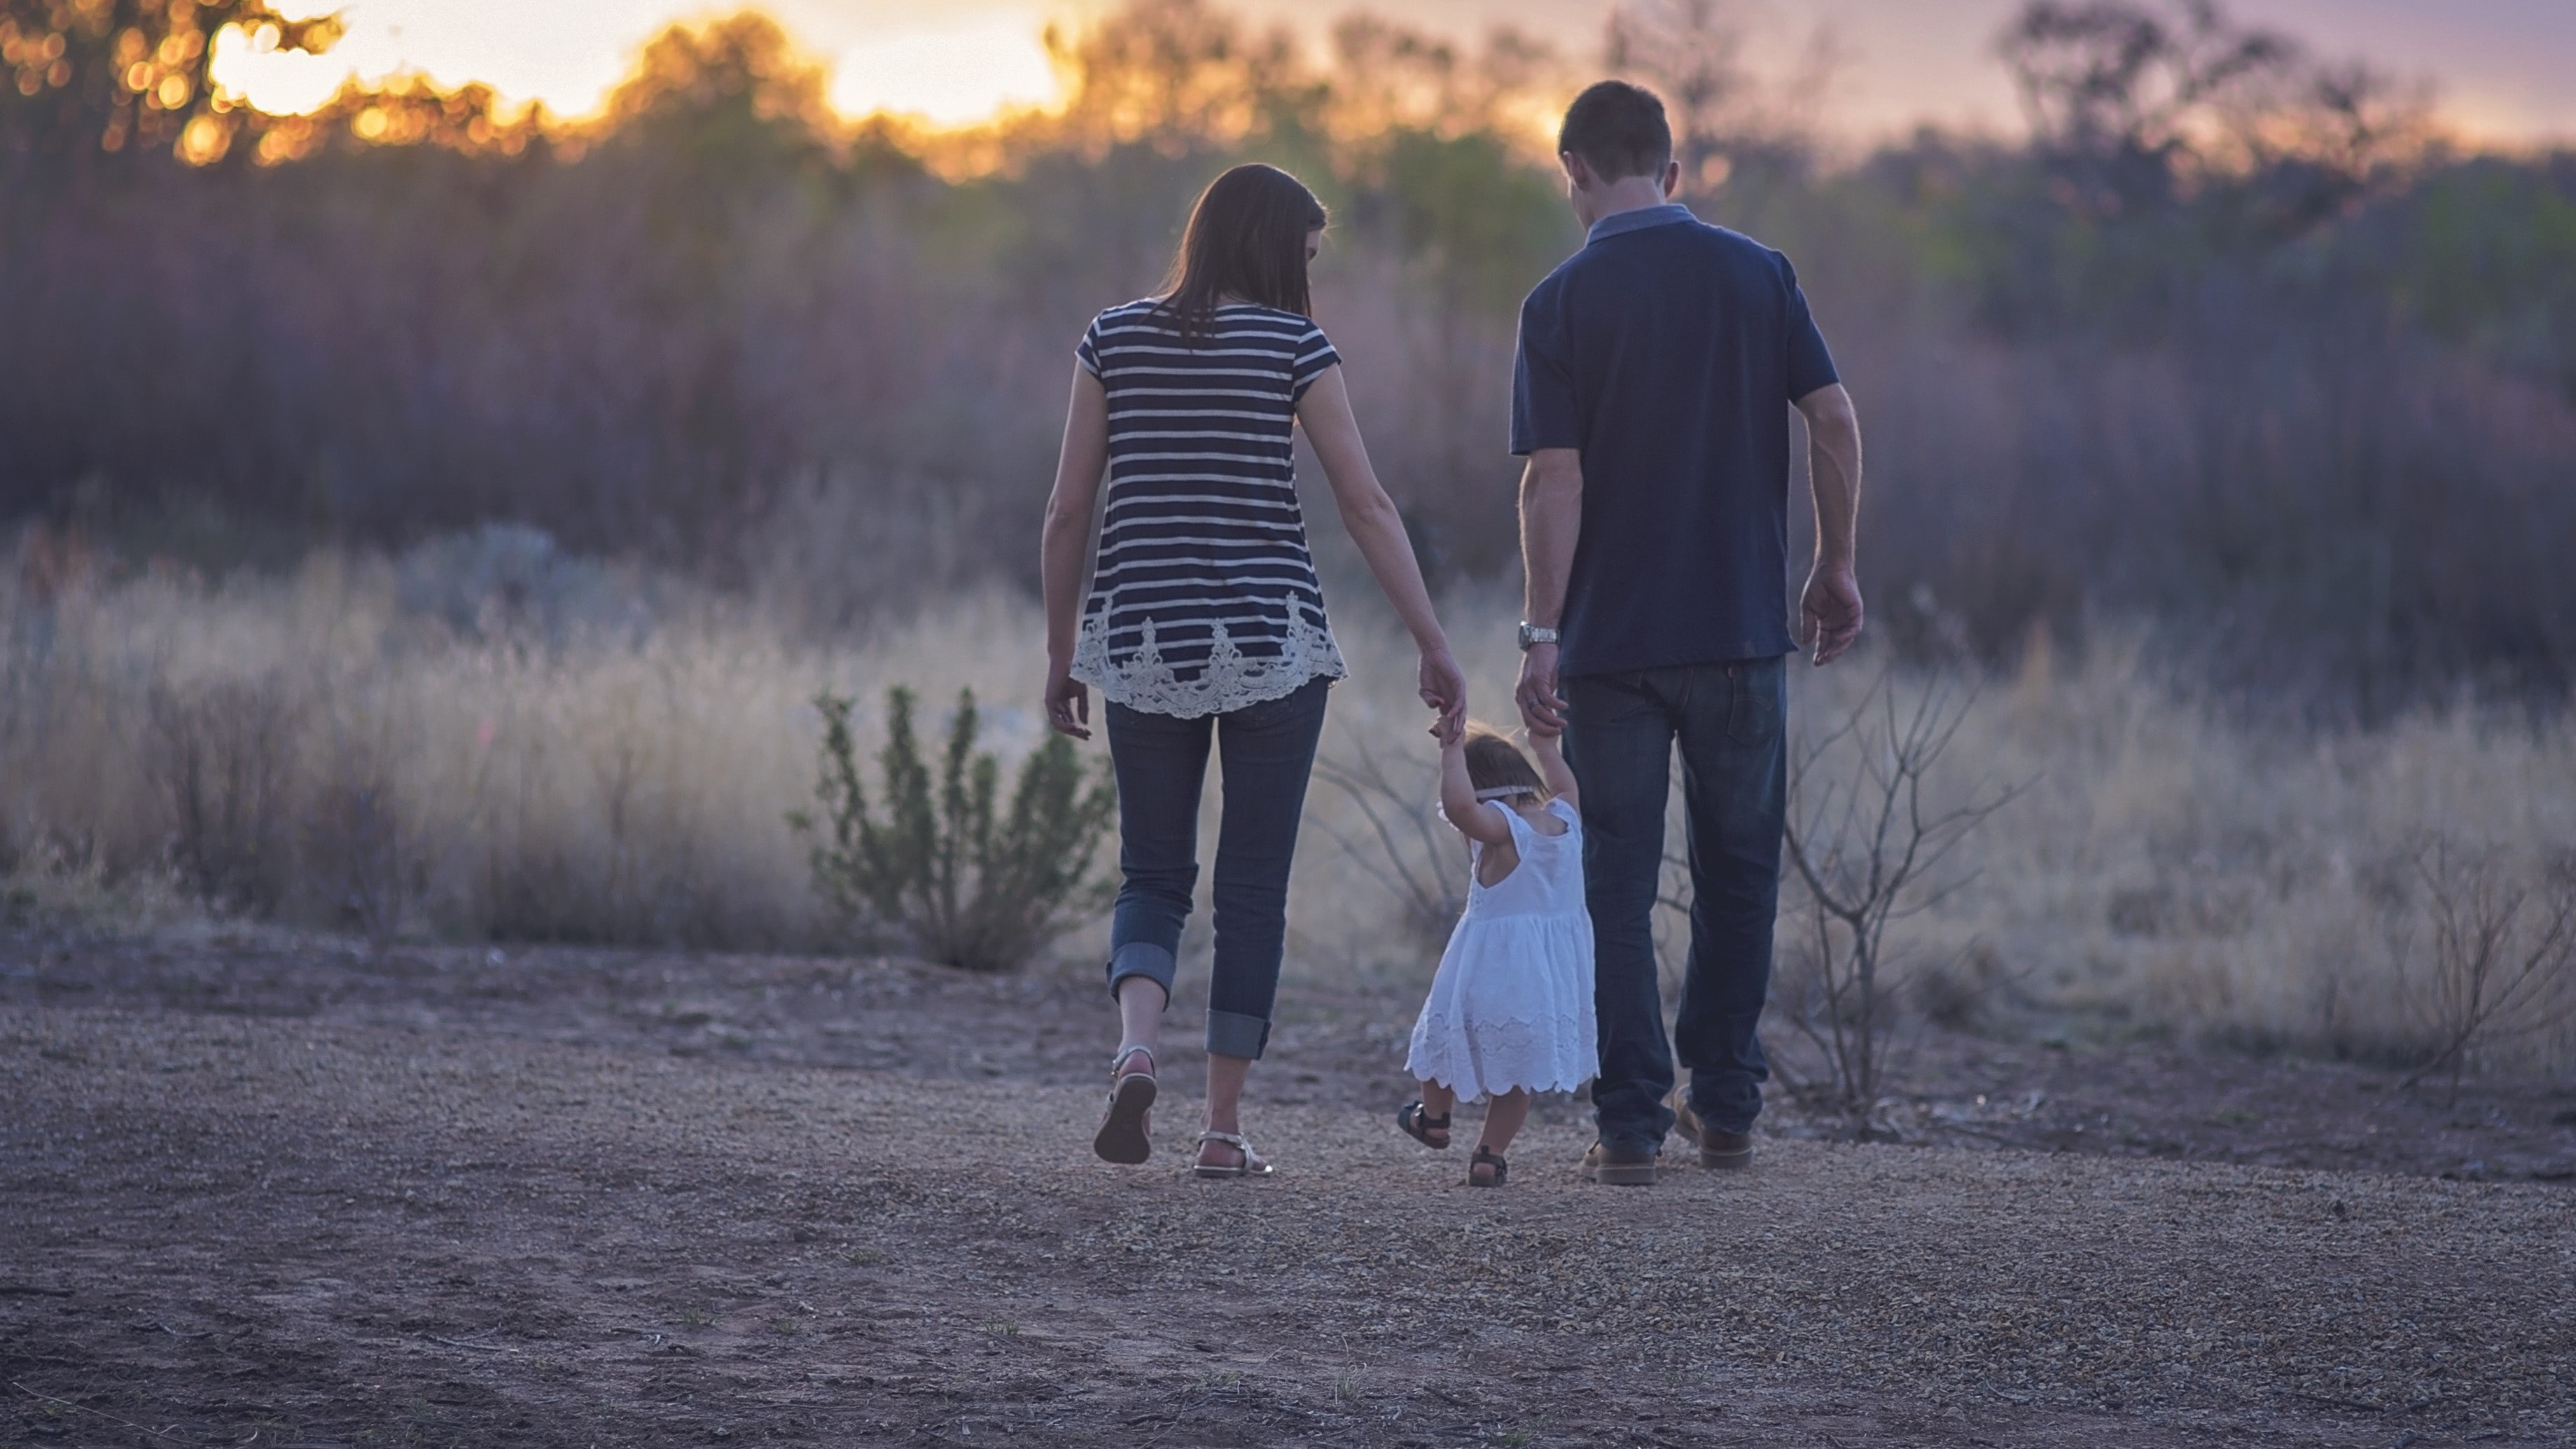 A man and a woman hold their toddlers hand while walking towards a sunset on a gravel path.